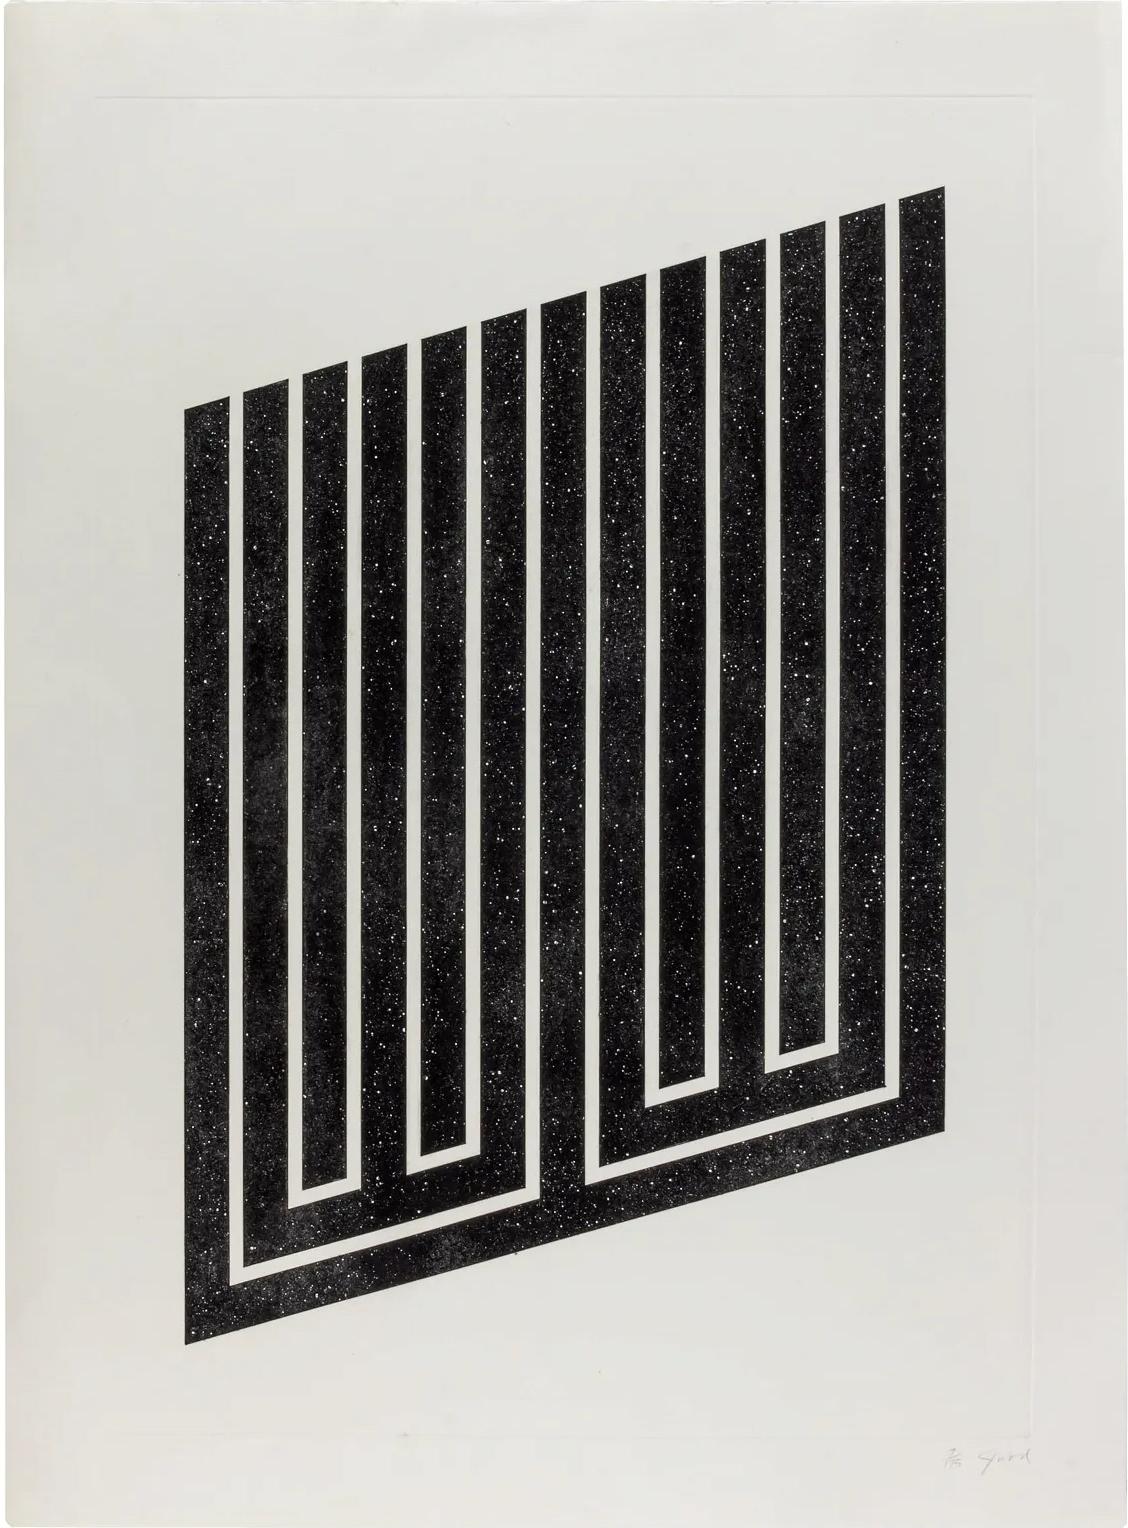 Donald Judd (American 1928-1994)
Untitled, 1978-79.
Aquatint on etching paper
Signed and numbered 8/175 in pencil (there were also 15 artist's proofs)
Published by the artist, with the blind stamp of printer, Styria Studio, New York
With full